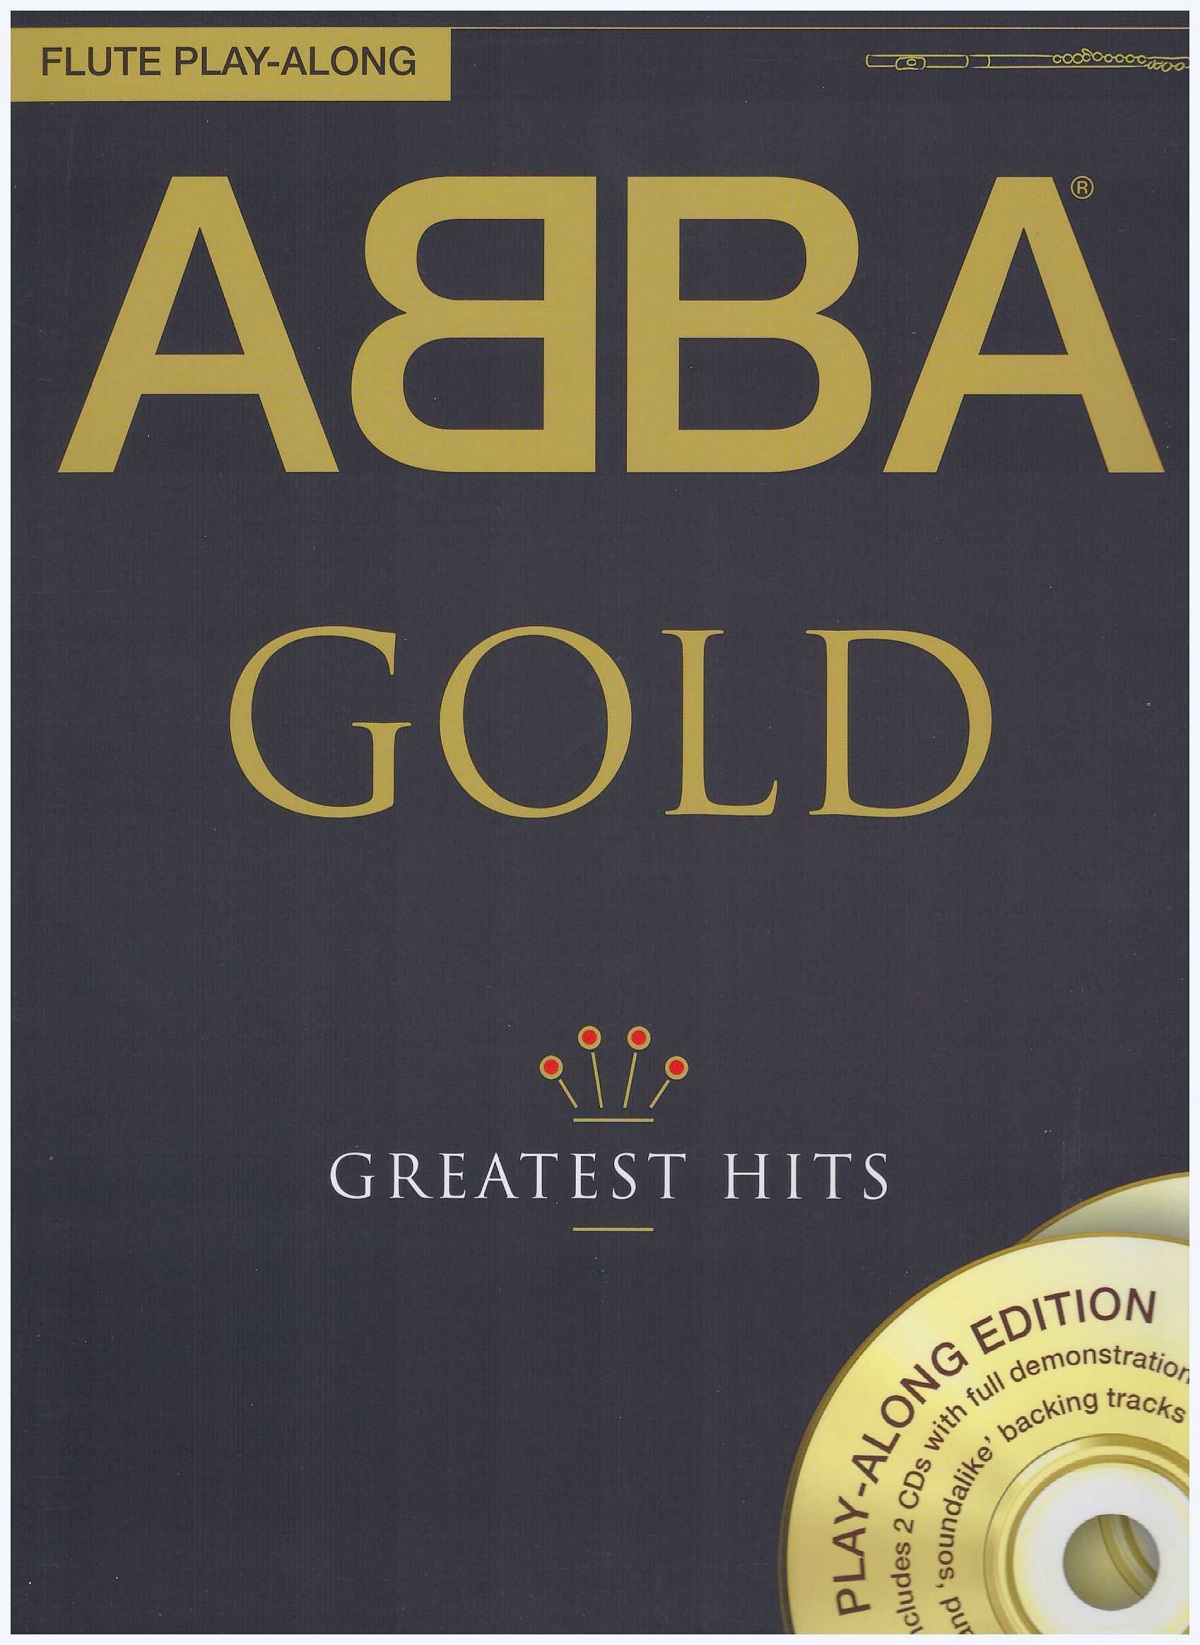 Flute Play-Along ABBA Gold Greatest Hits / ABBA / Flute Book / Music Book